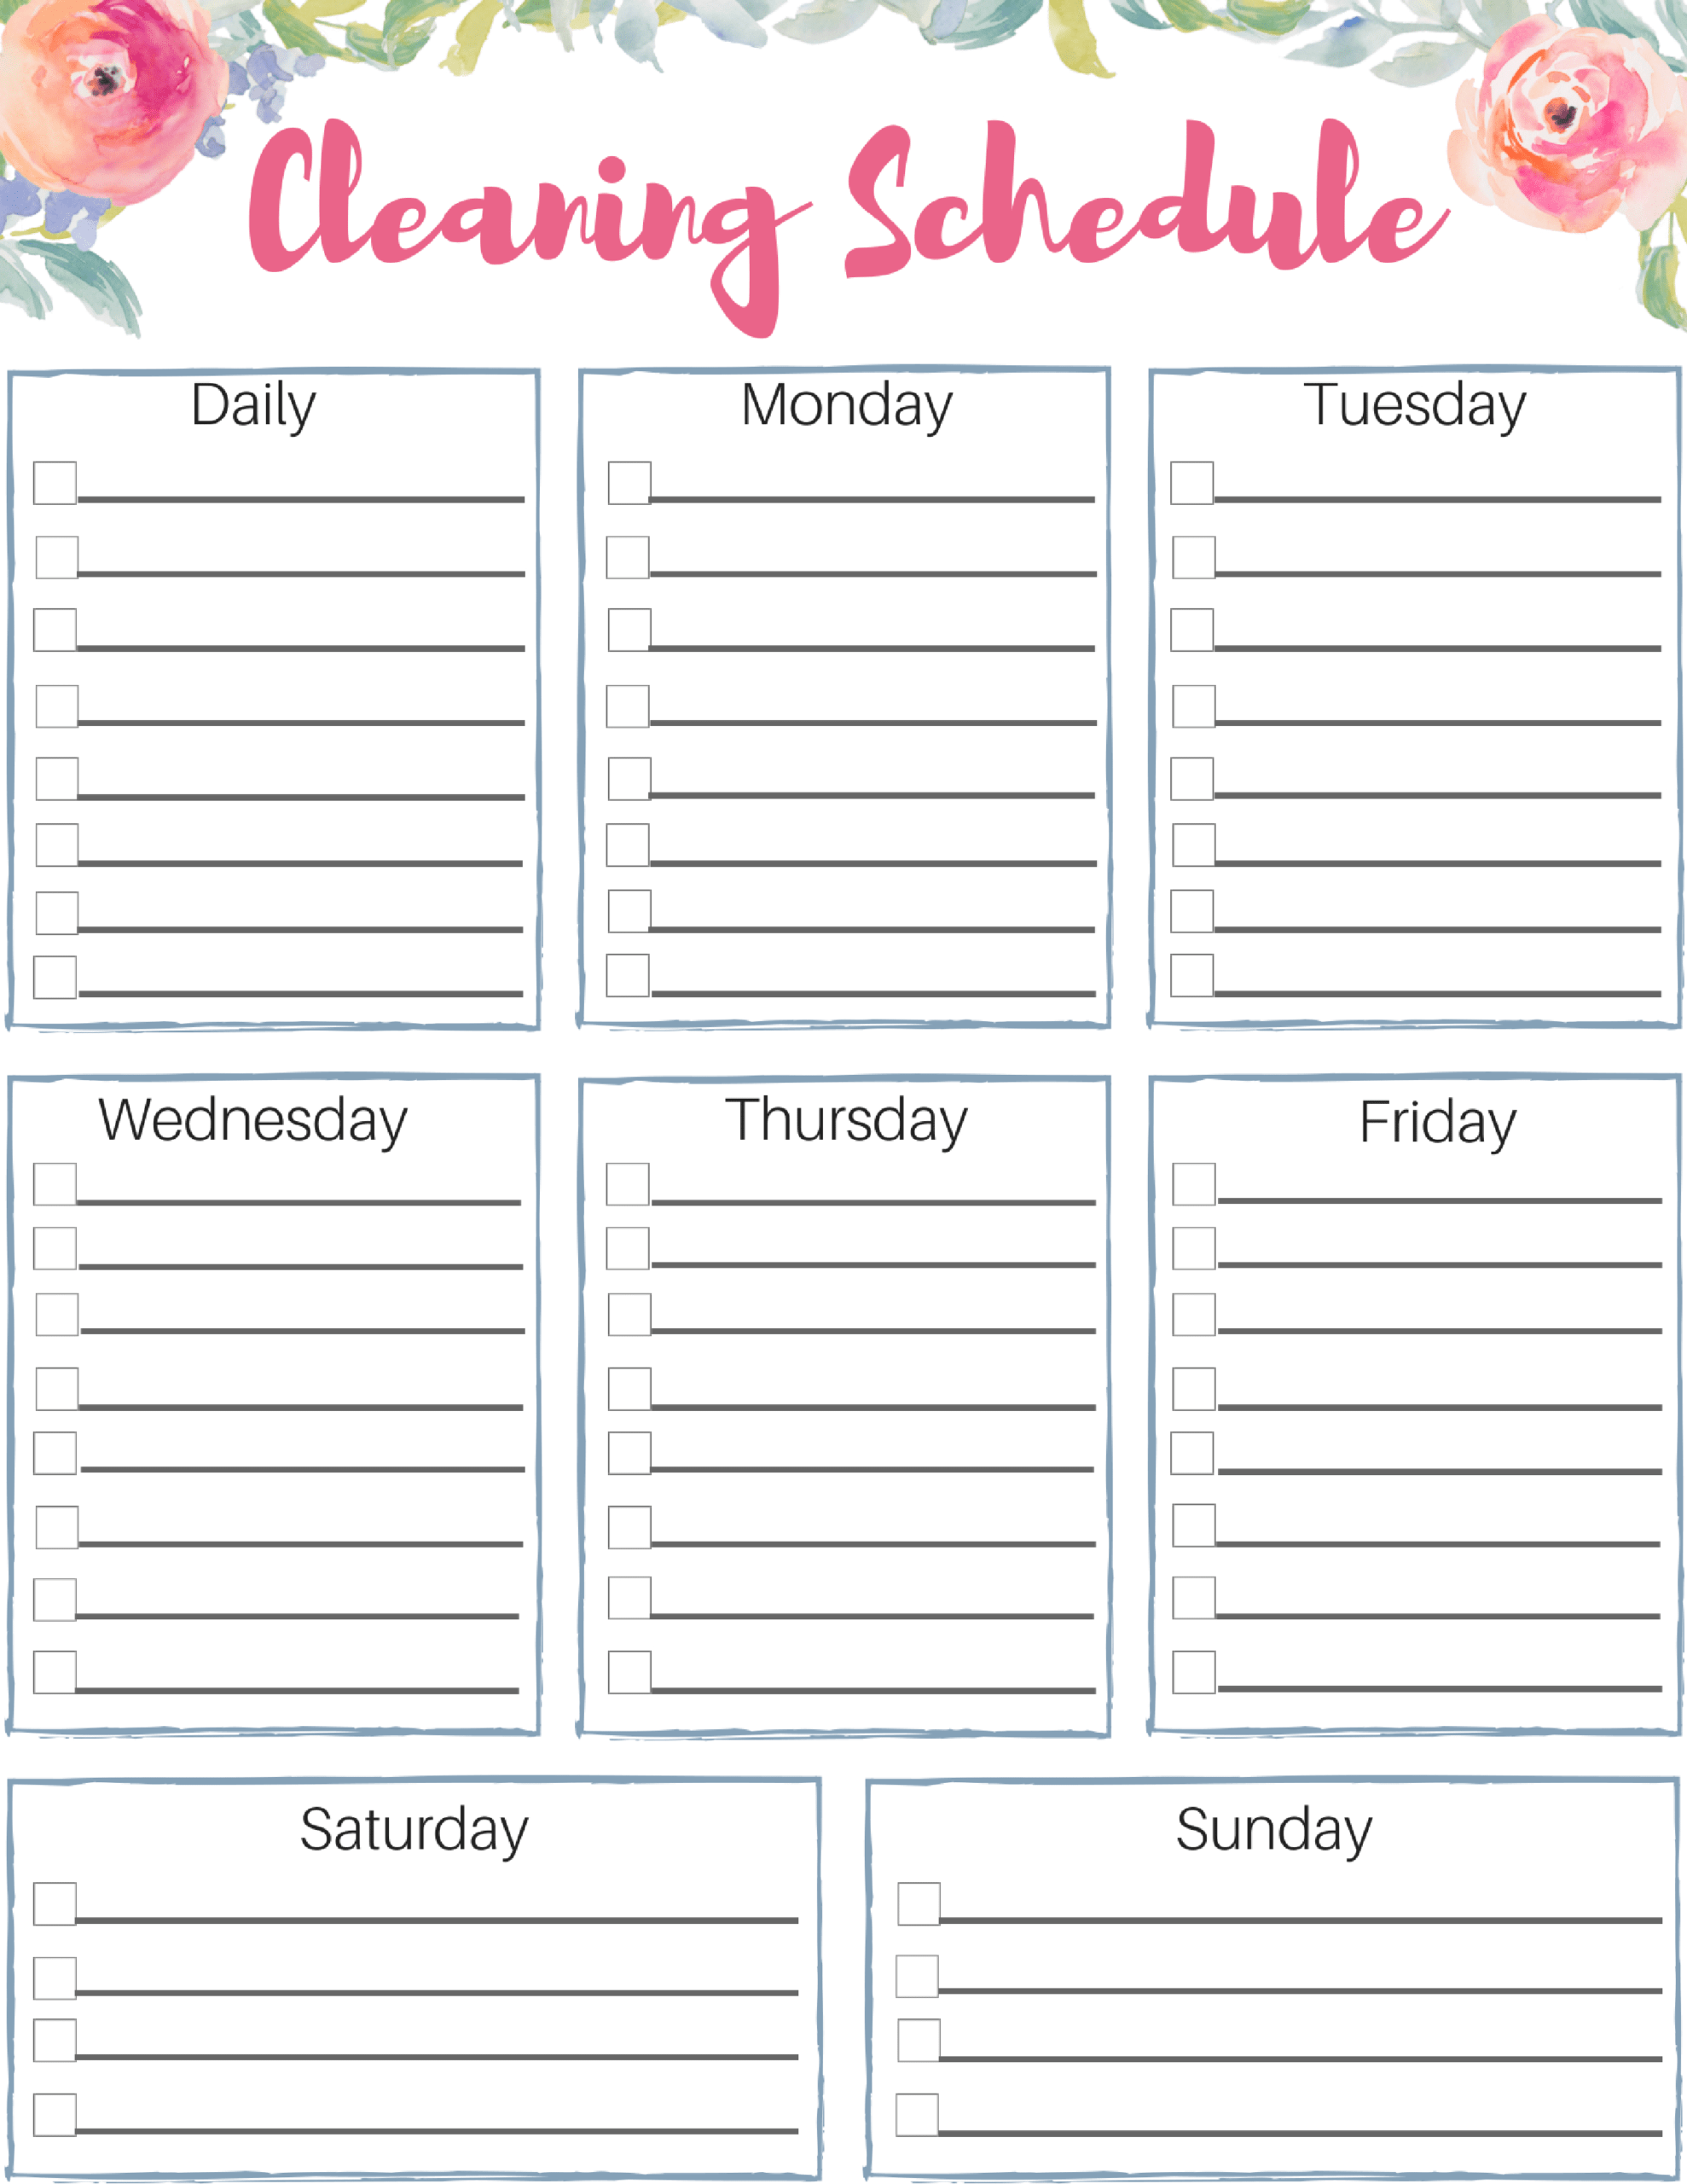 Impressive Editable Cleaning Schedule Template Ideas Pdf Throughout Blank Cleaning Schedule Template